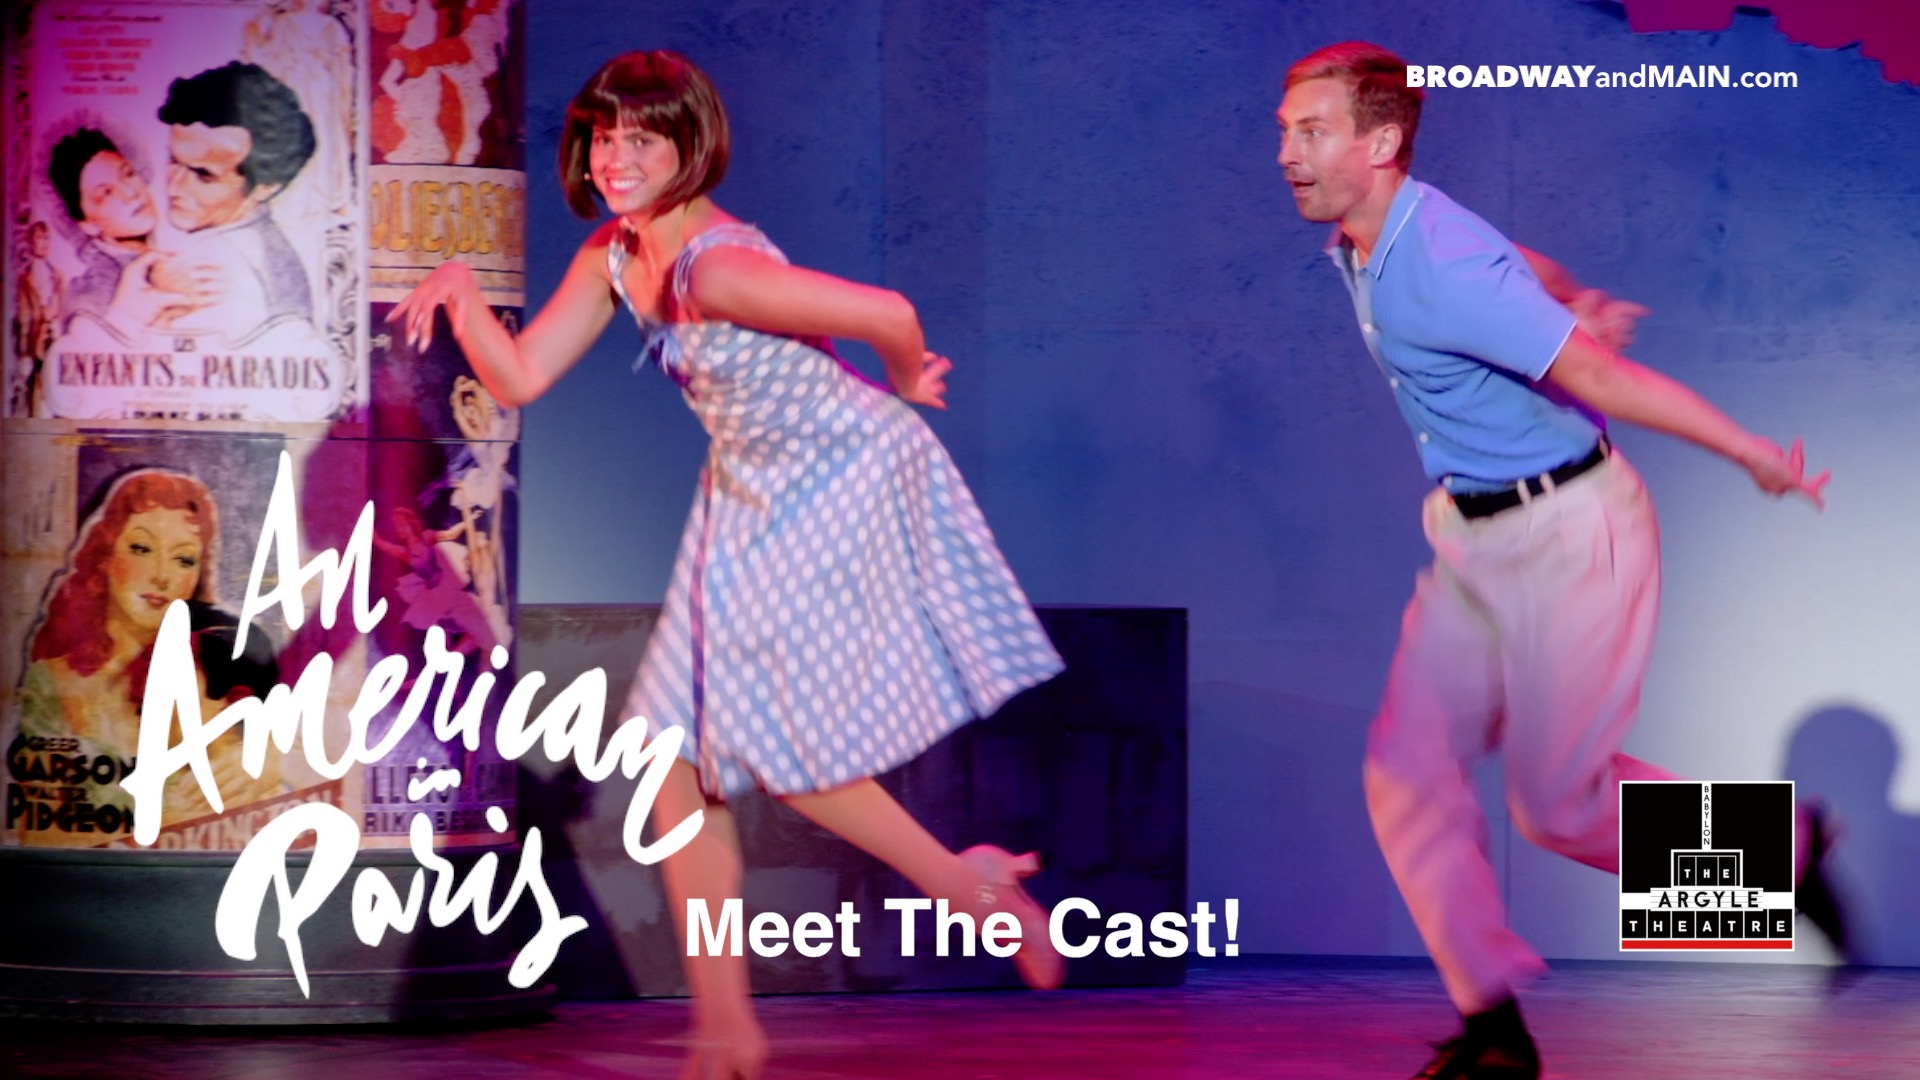 Meet The Cast of An American In Paris at the Argygle Theatre